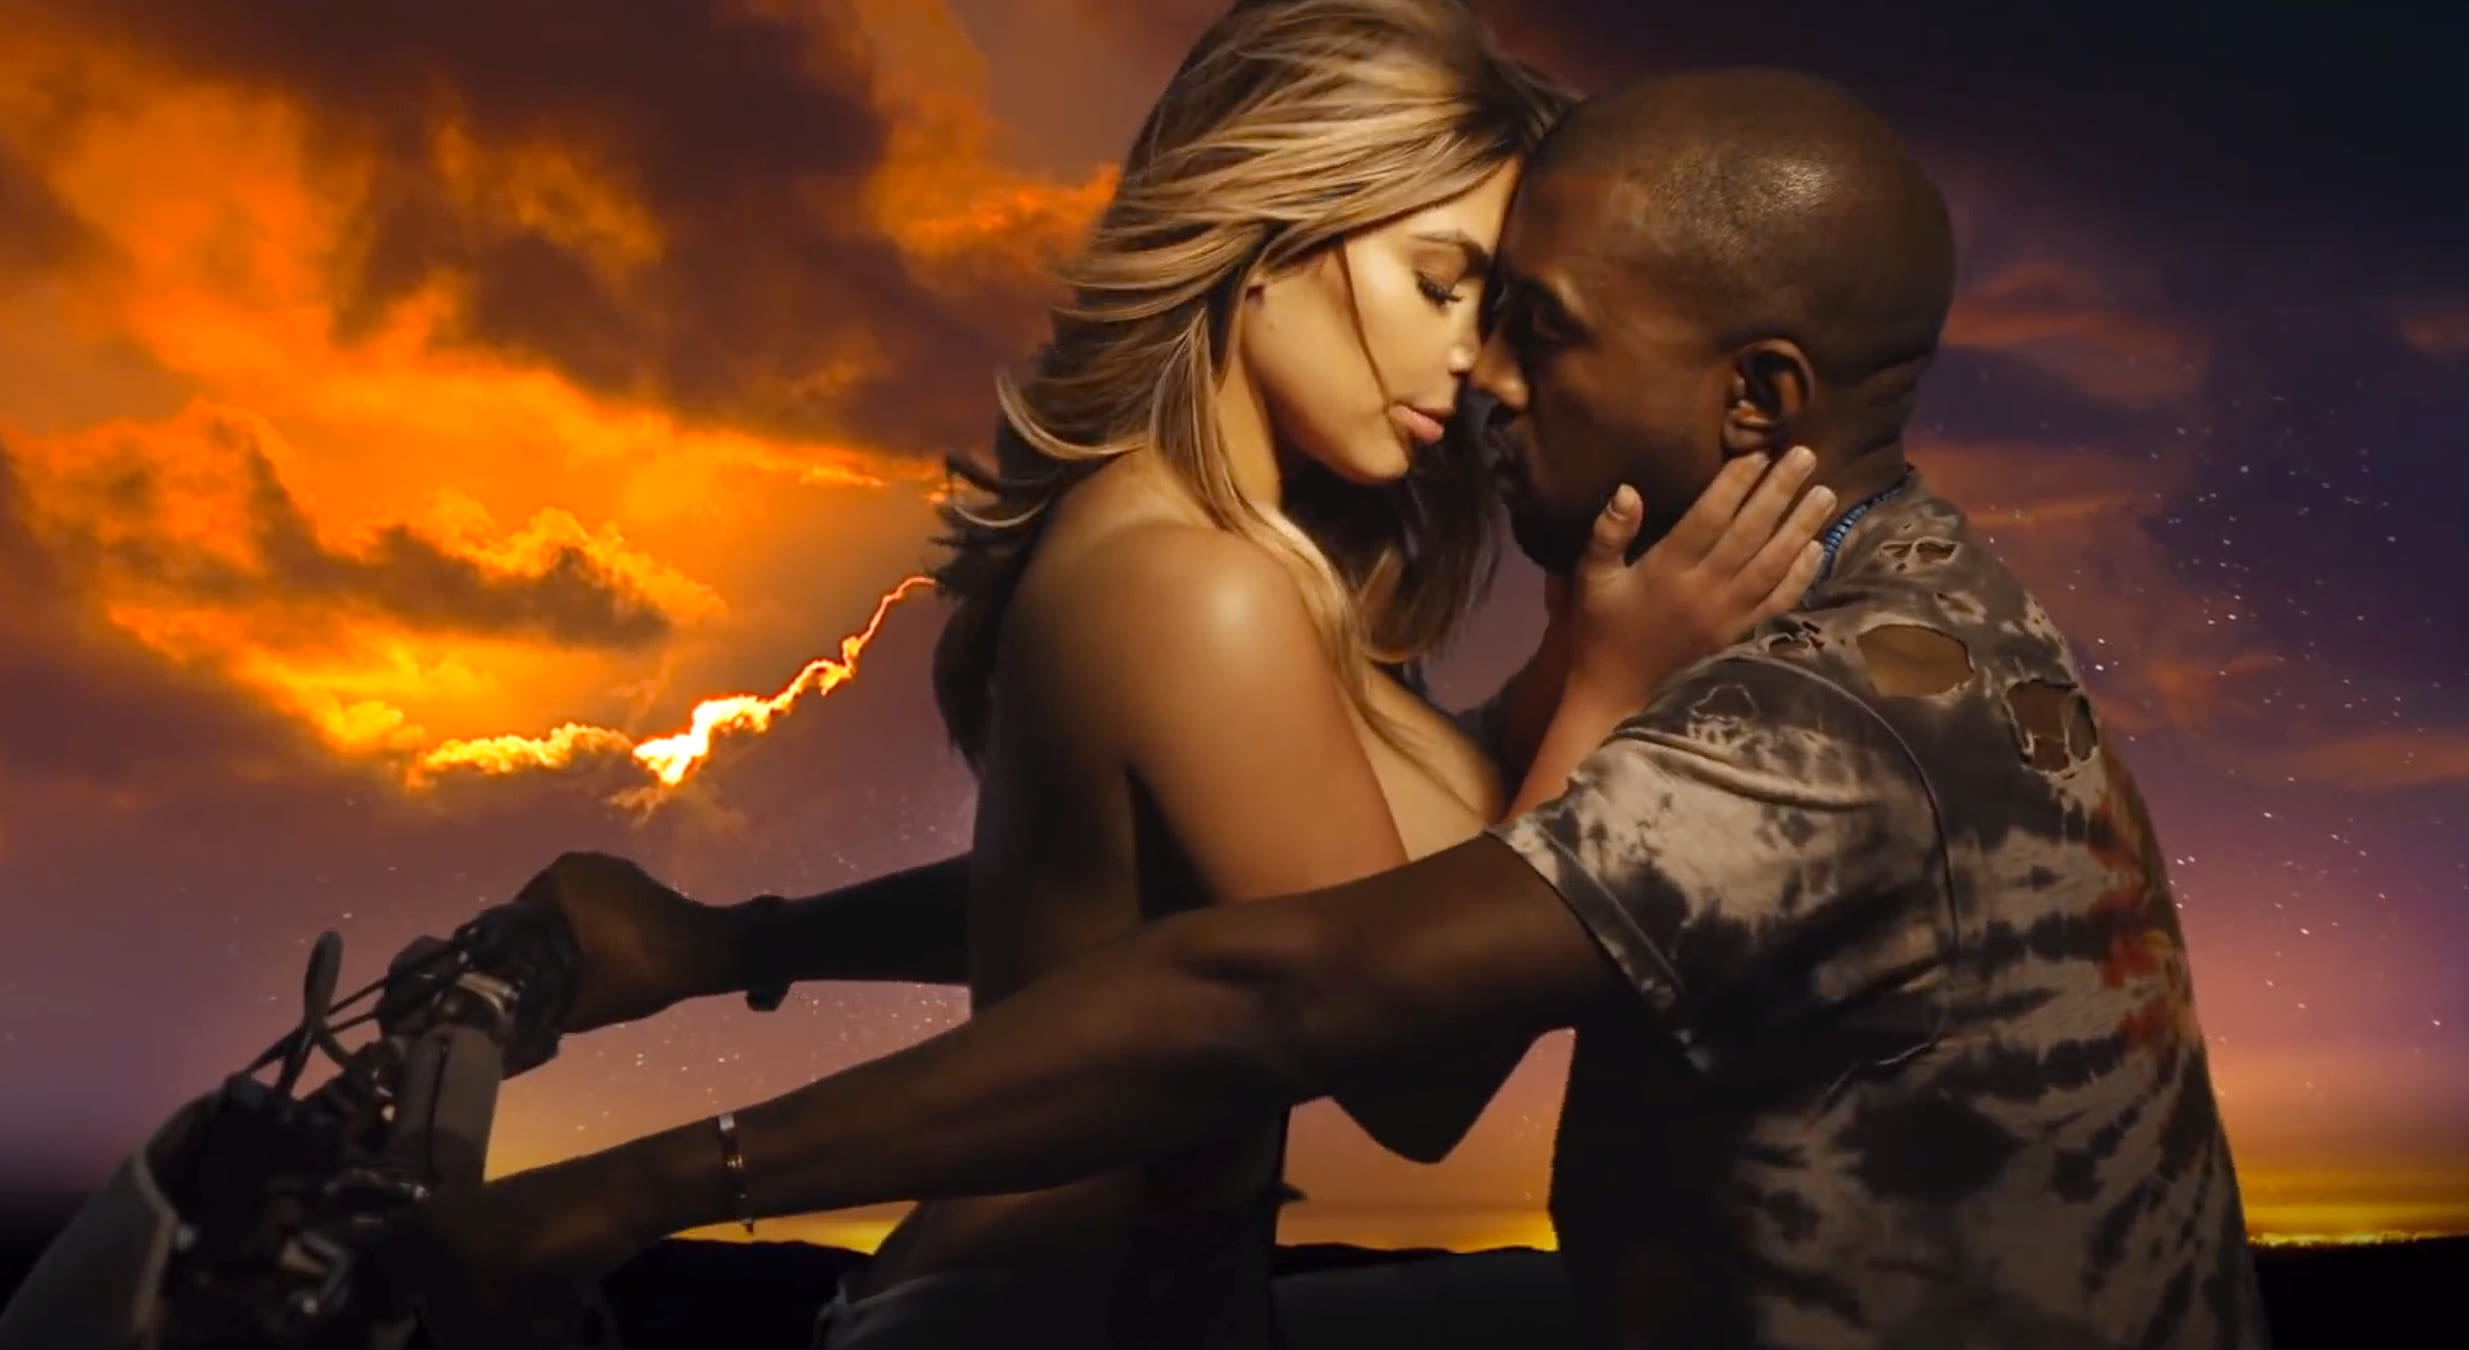 Celebrity Music Video Couples: Beyonce and Jay-Z, Travis Scott and Kylie Jenner and More